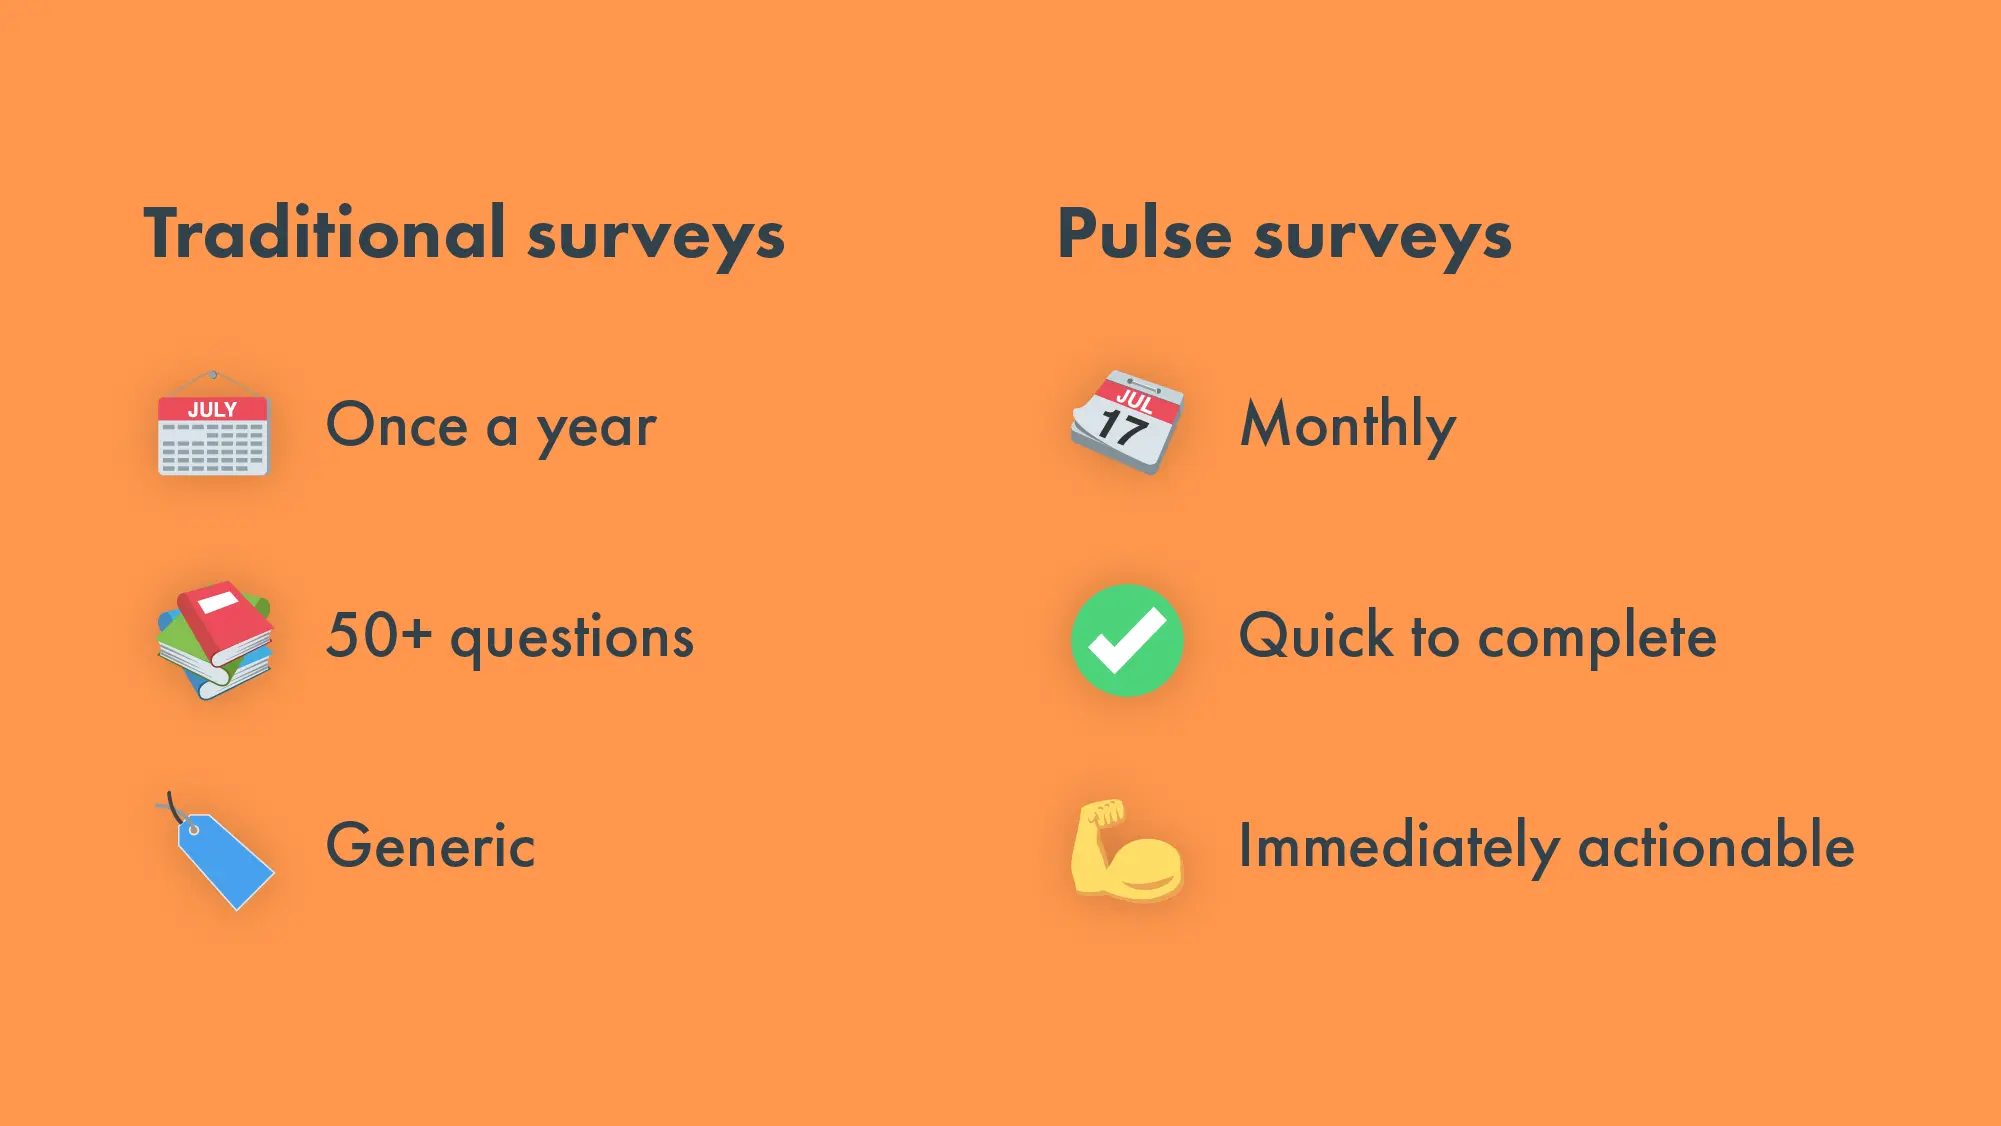 Summary of differences between traditional surveys and pulse surveys